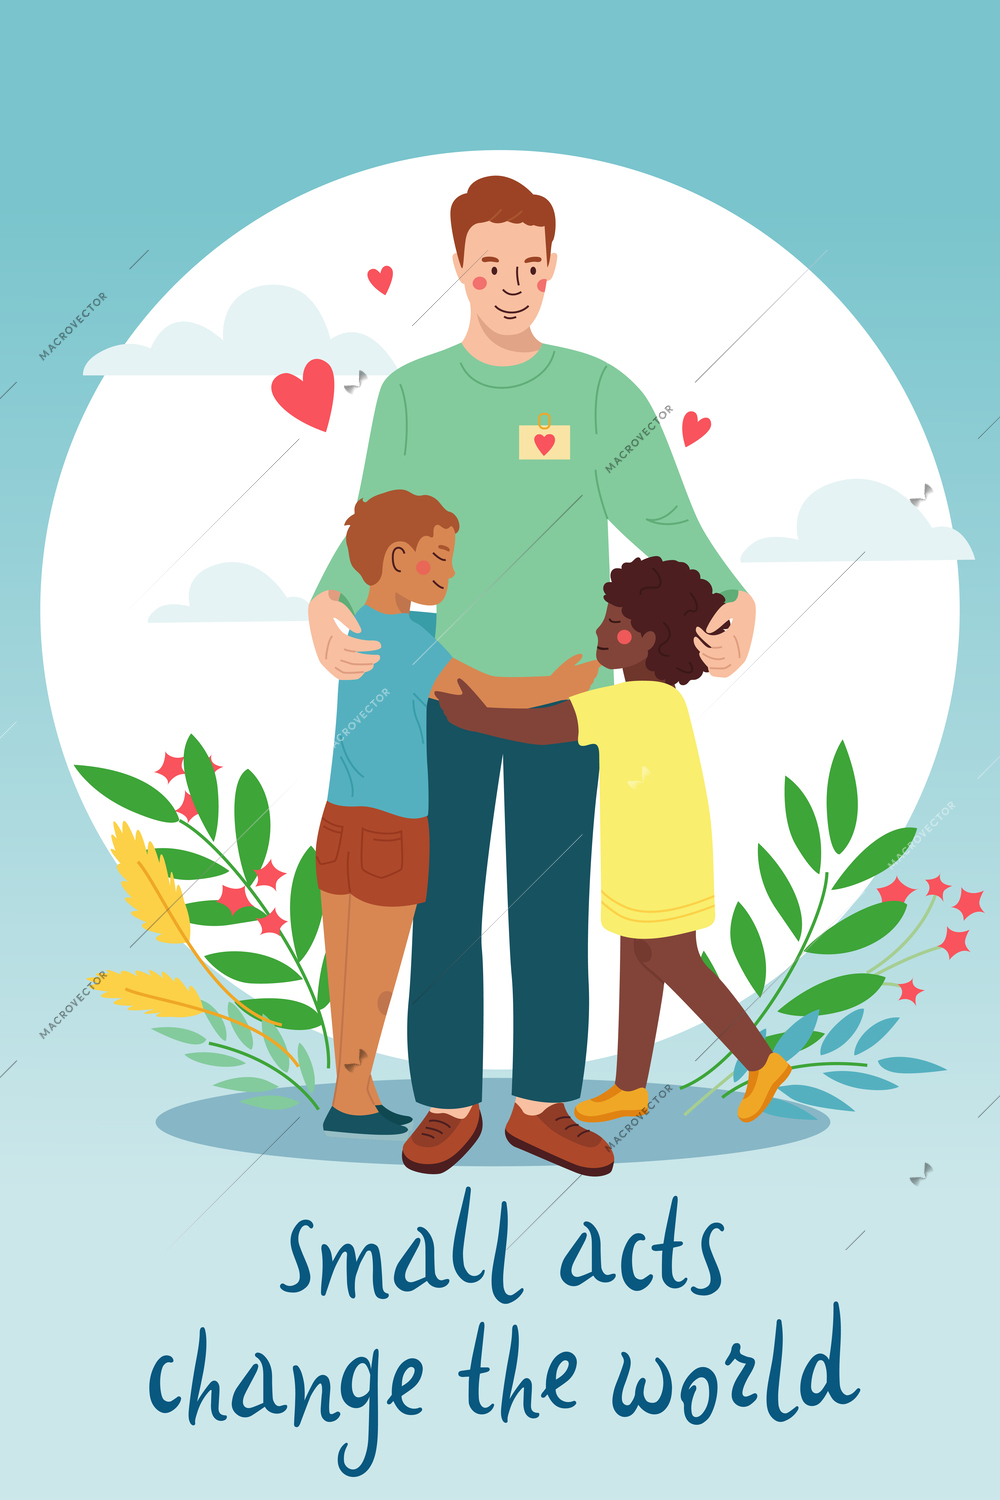 Charity flat recolor composition with ornate text and characters of man hugging children with floral ornaments vector illustration